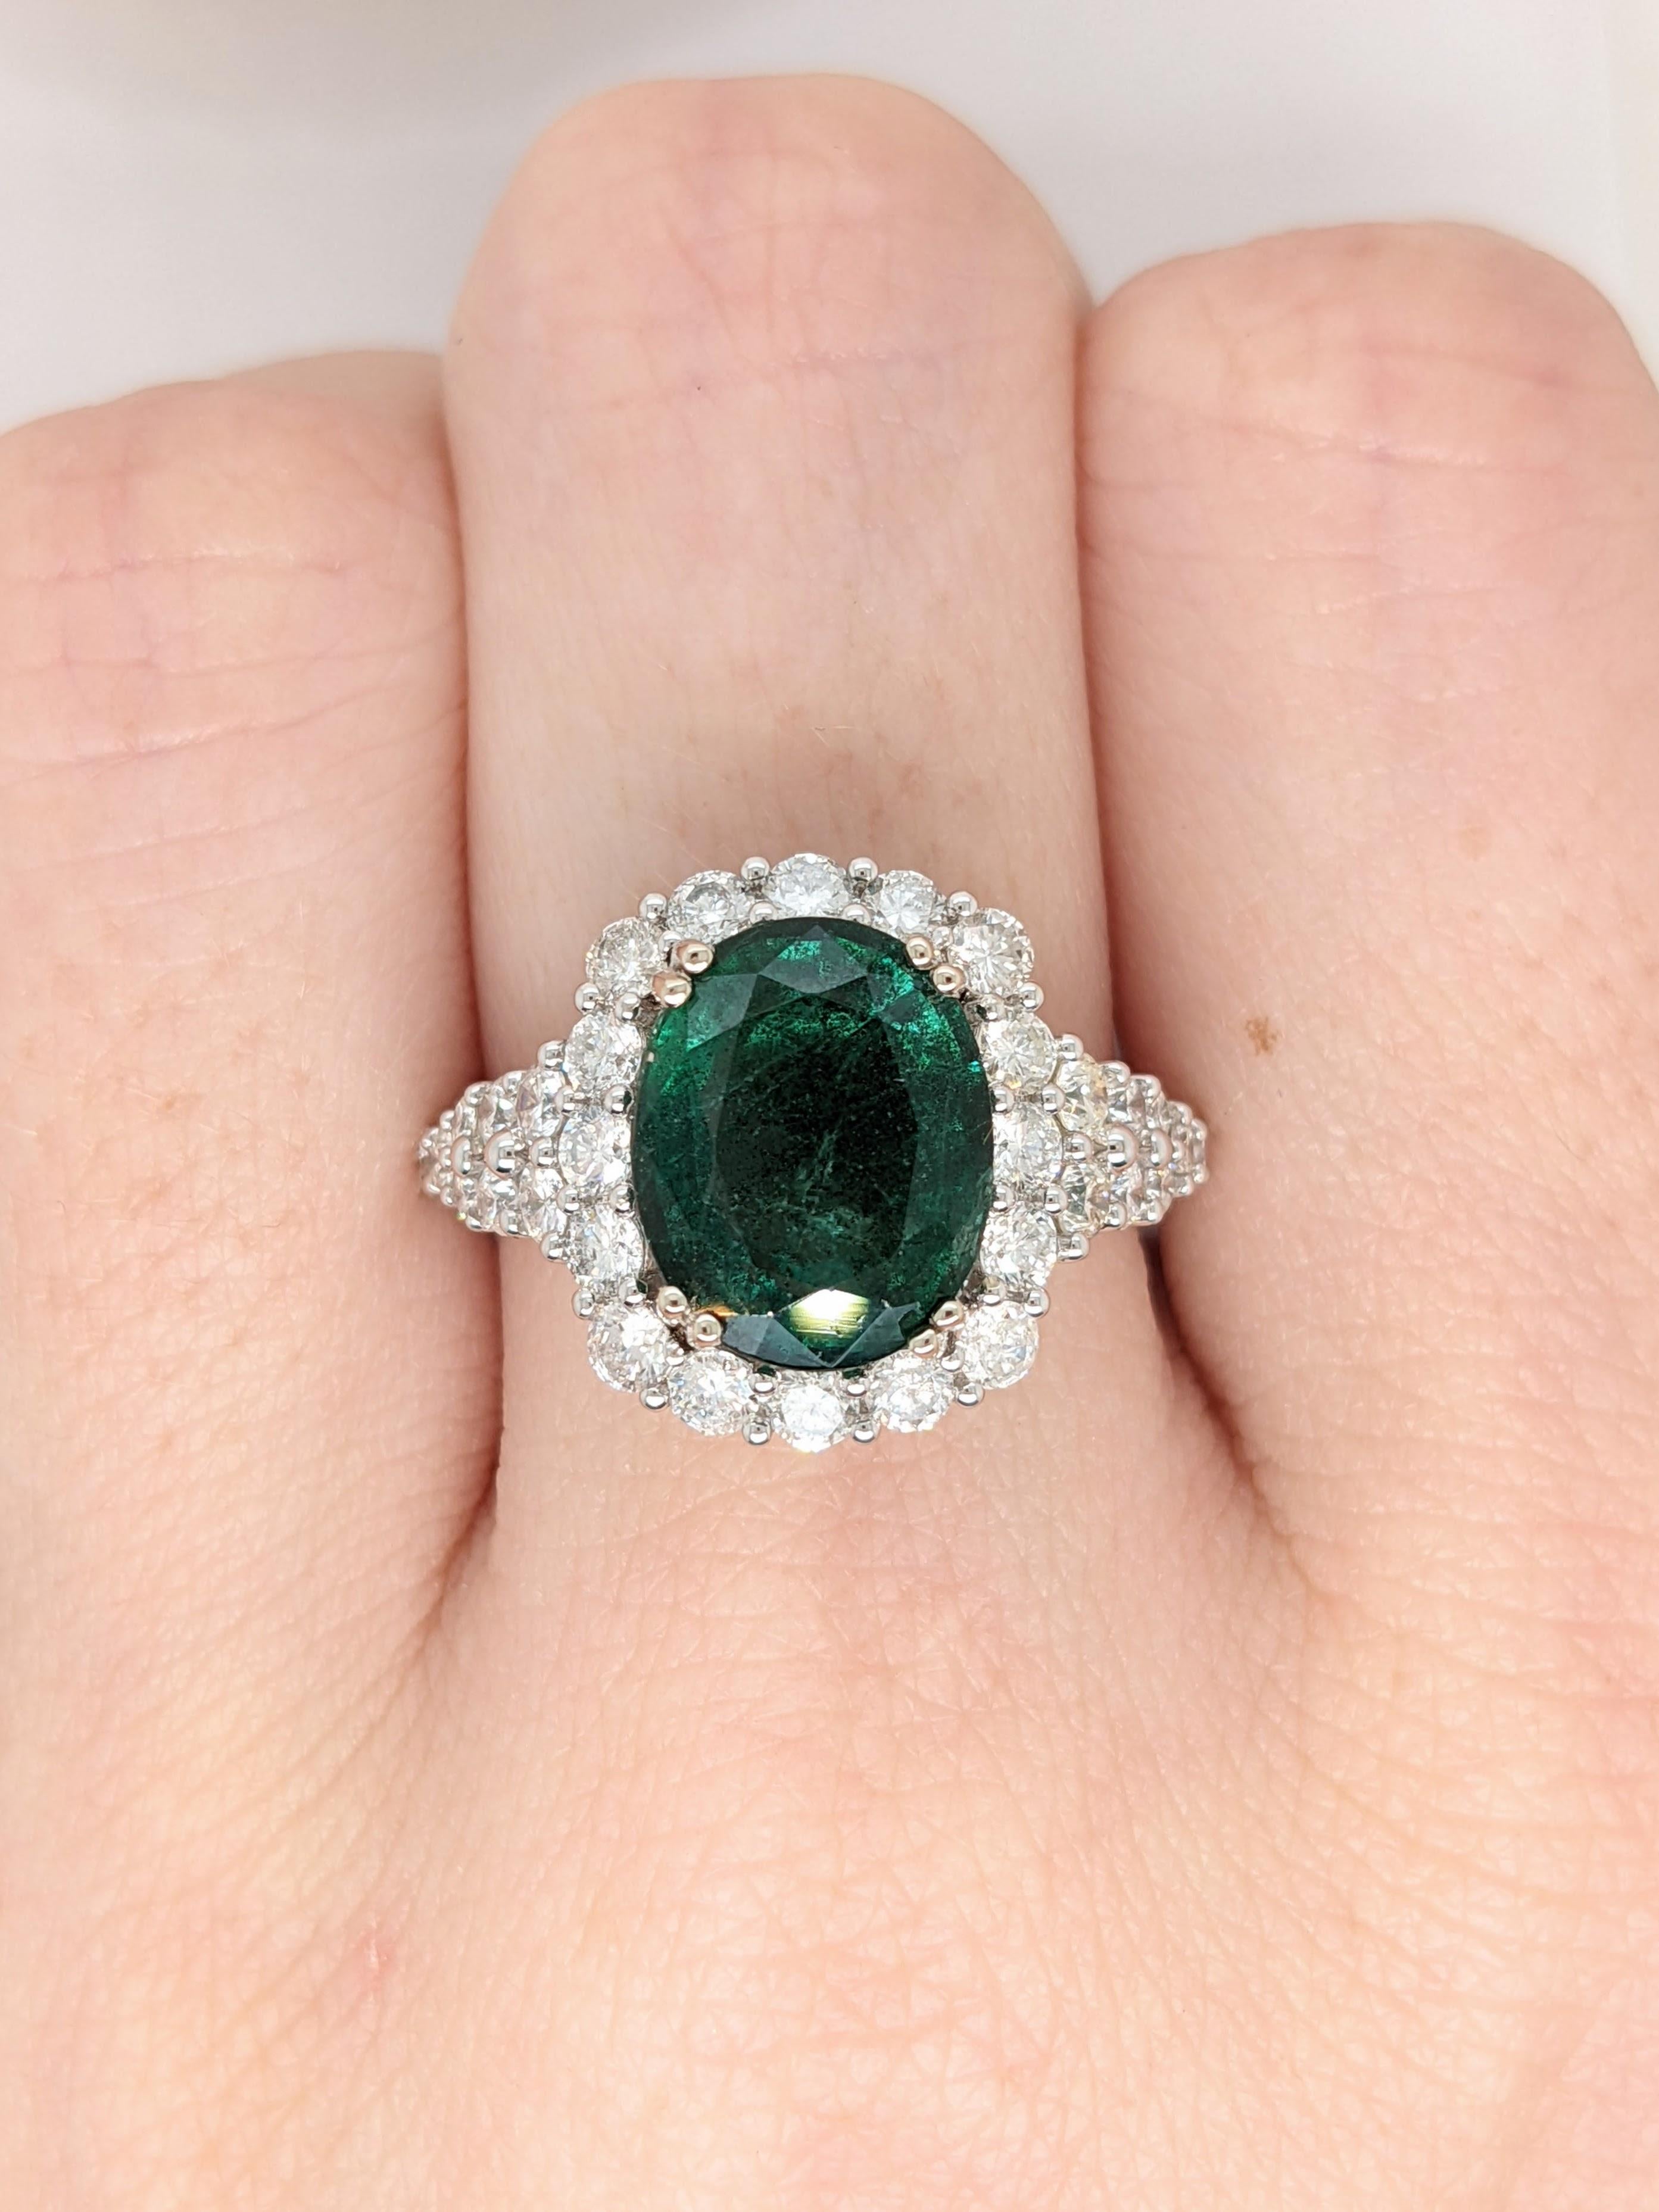 3 Carat Emerald Ring in 14k Solid White Gold with a Halo of Natural Diamonds In New Condition For Sale In Columbus, OH